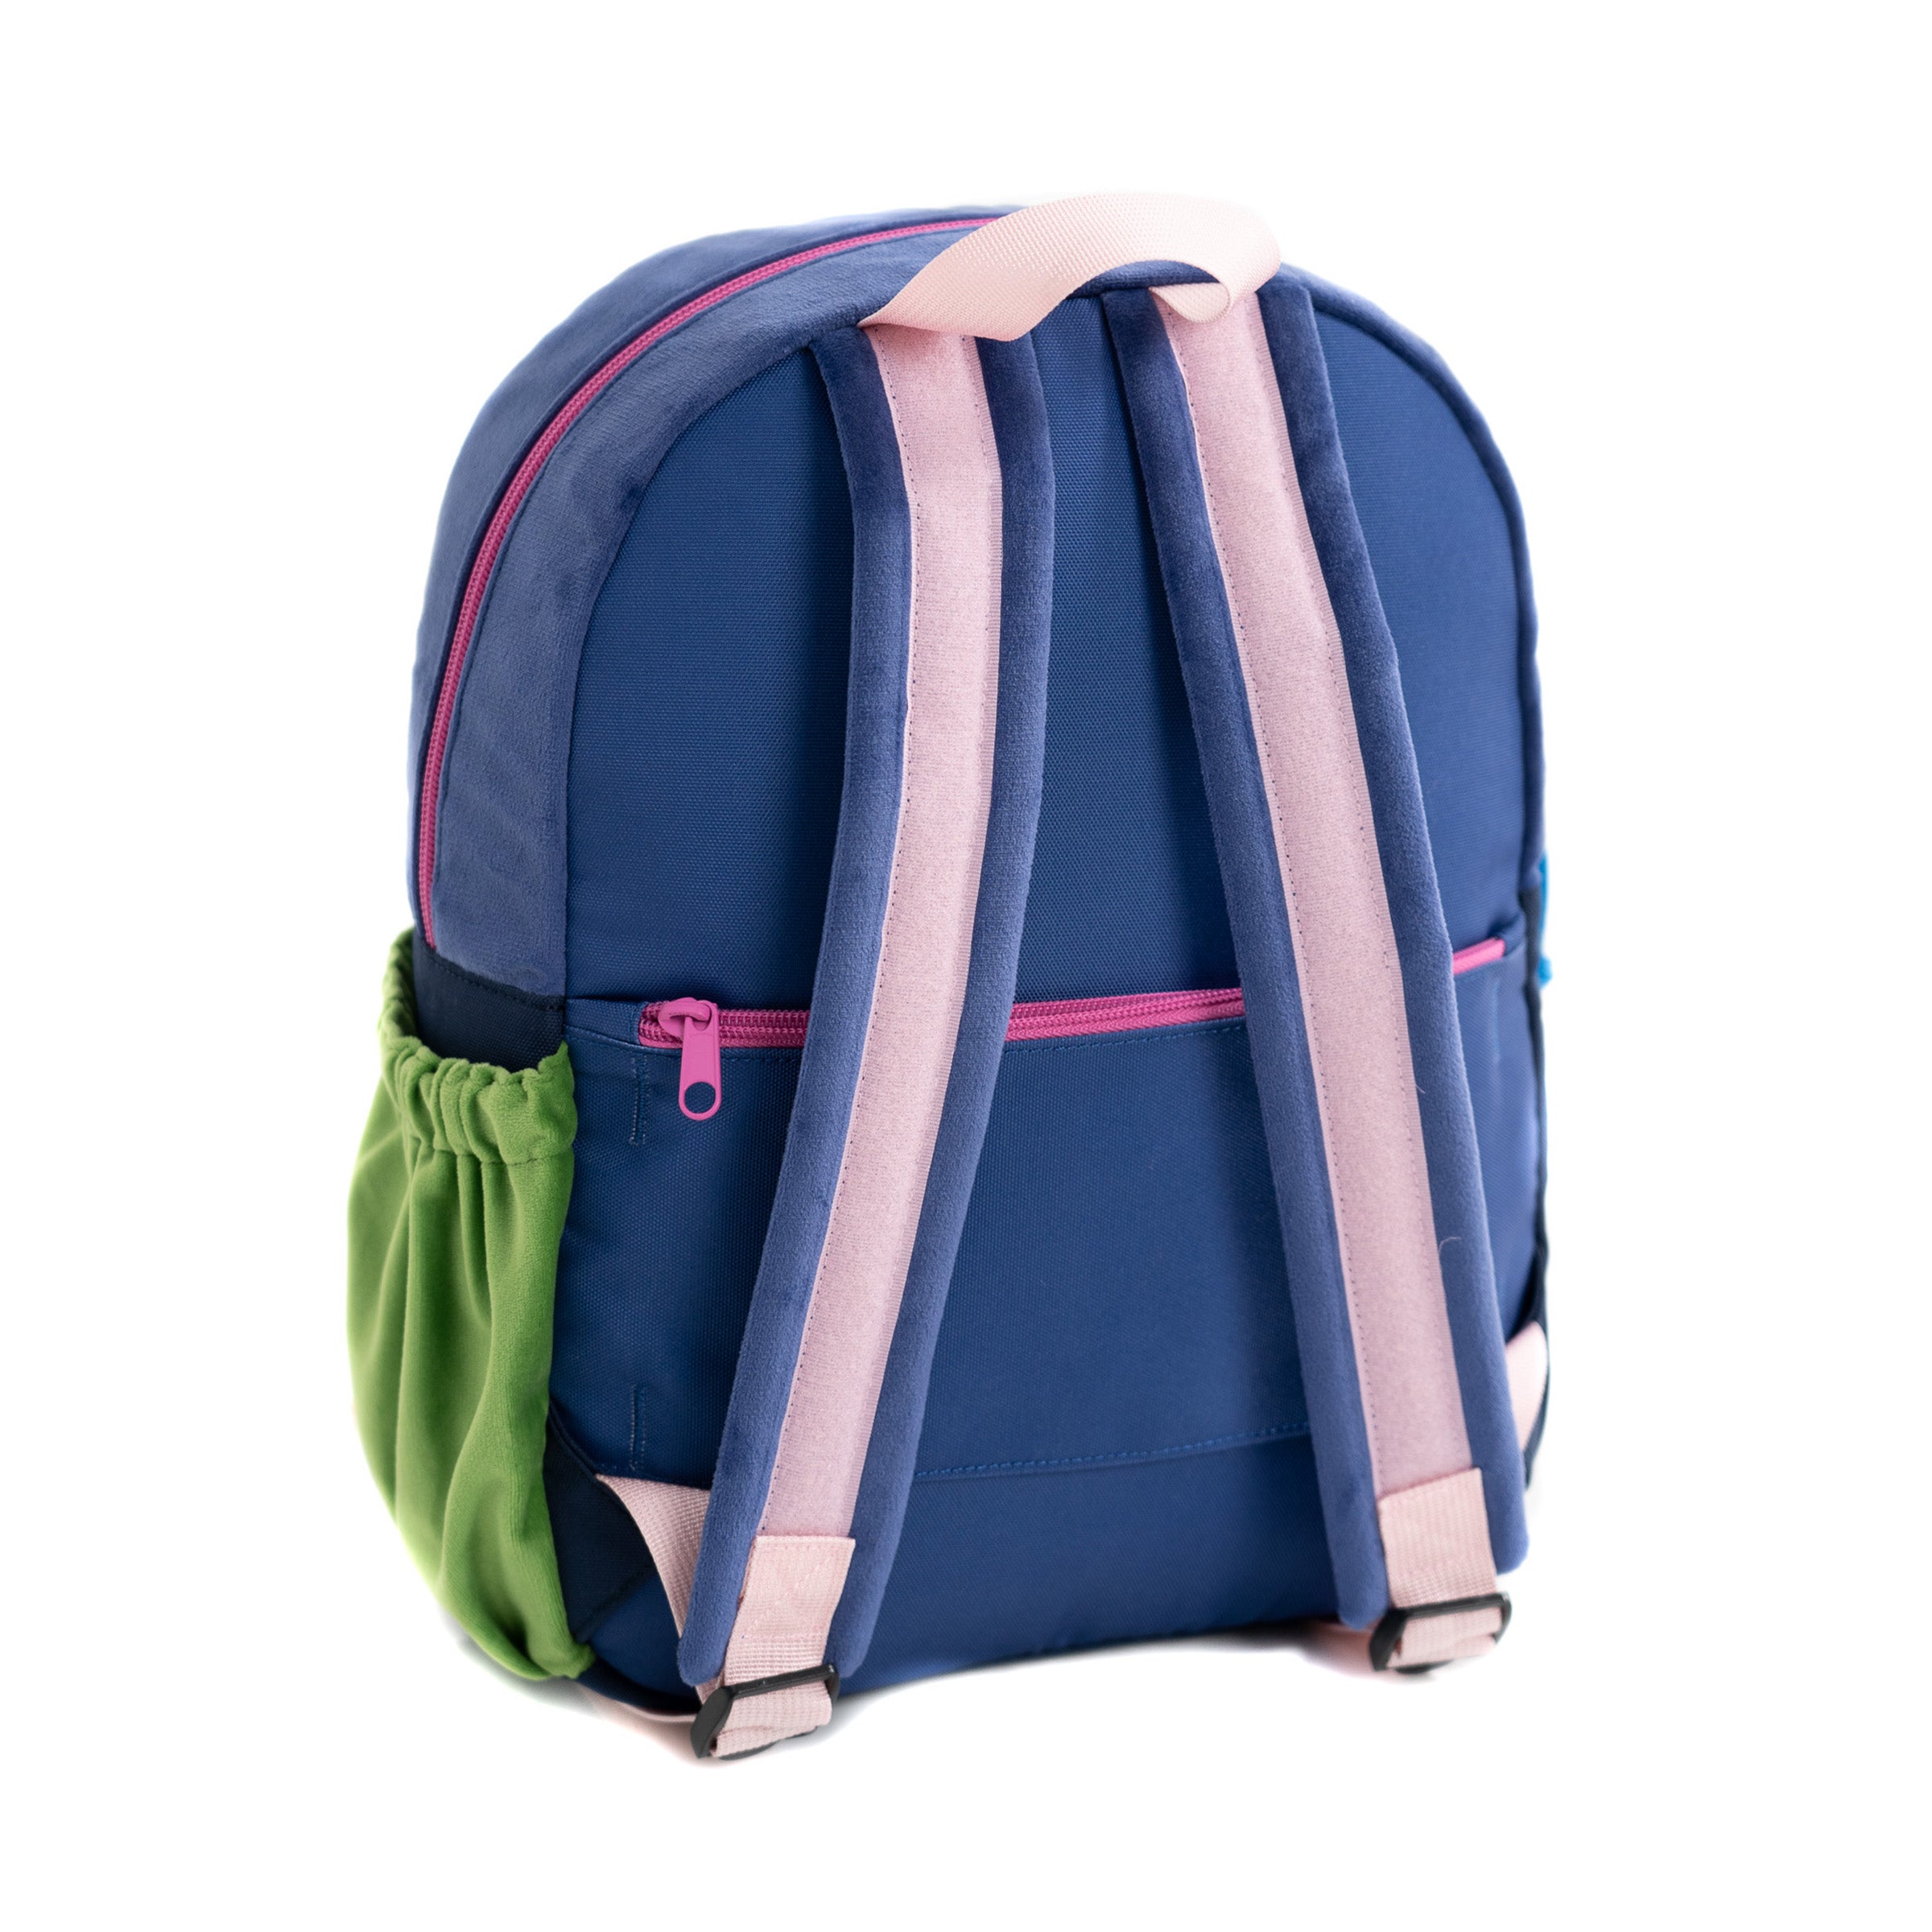 Becco Lunch Box – Pink/Lavender – Becco Bags